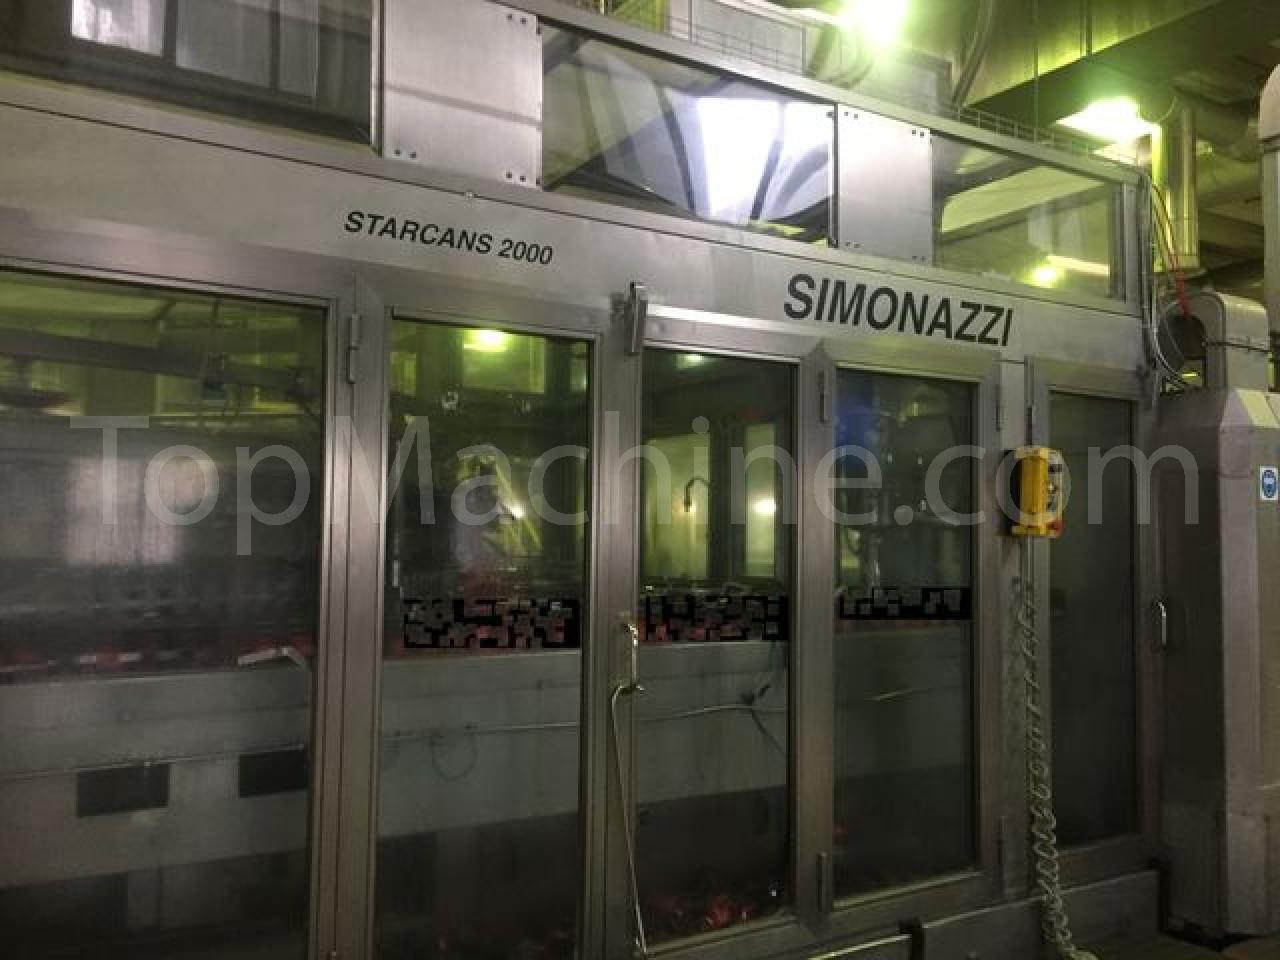 Used Simonazzi Starcans 2000 Beverages & Liquids Can filling